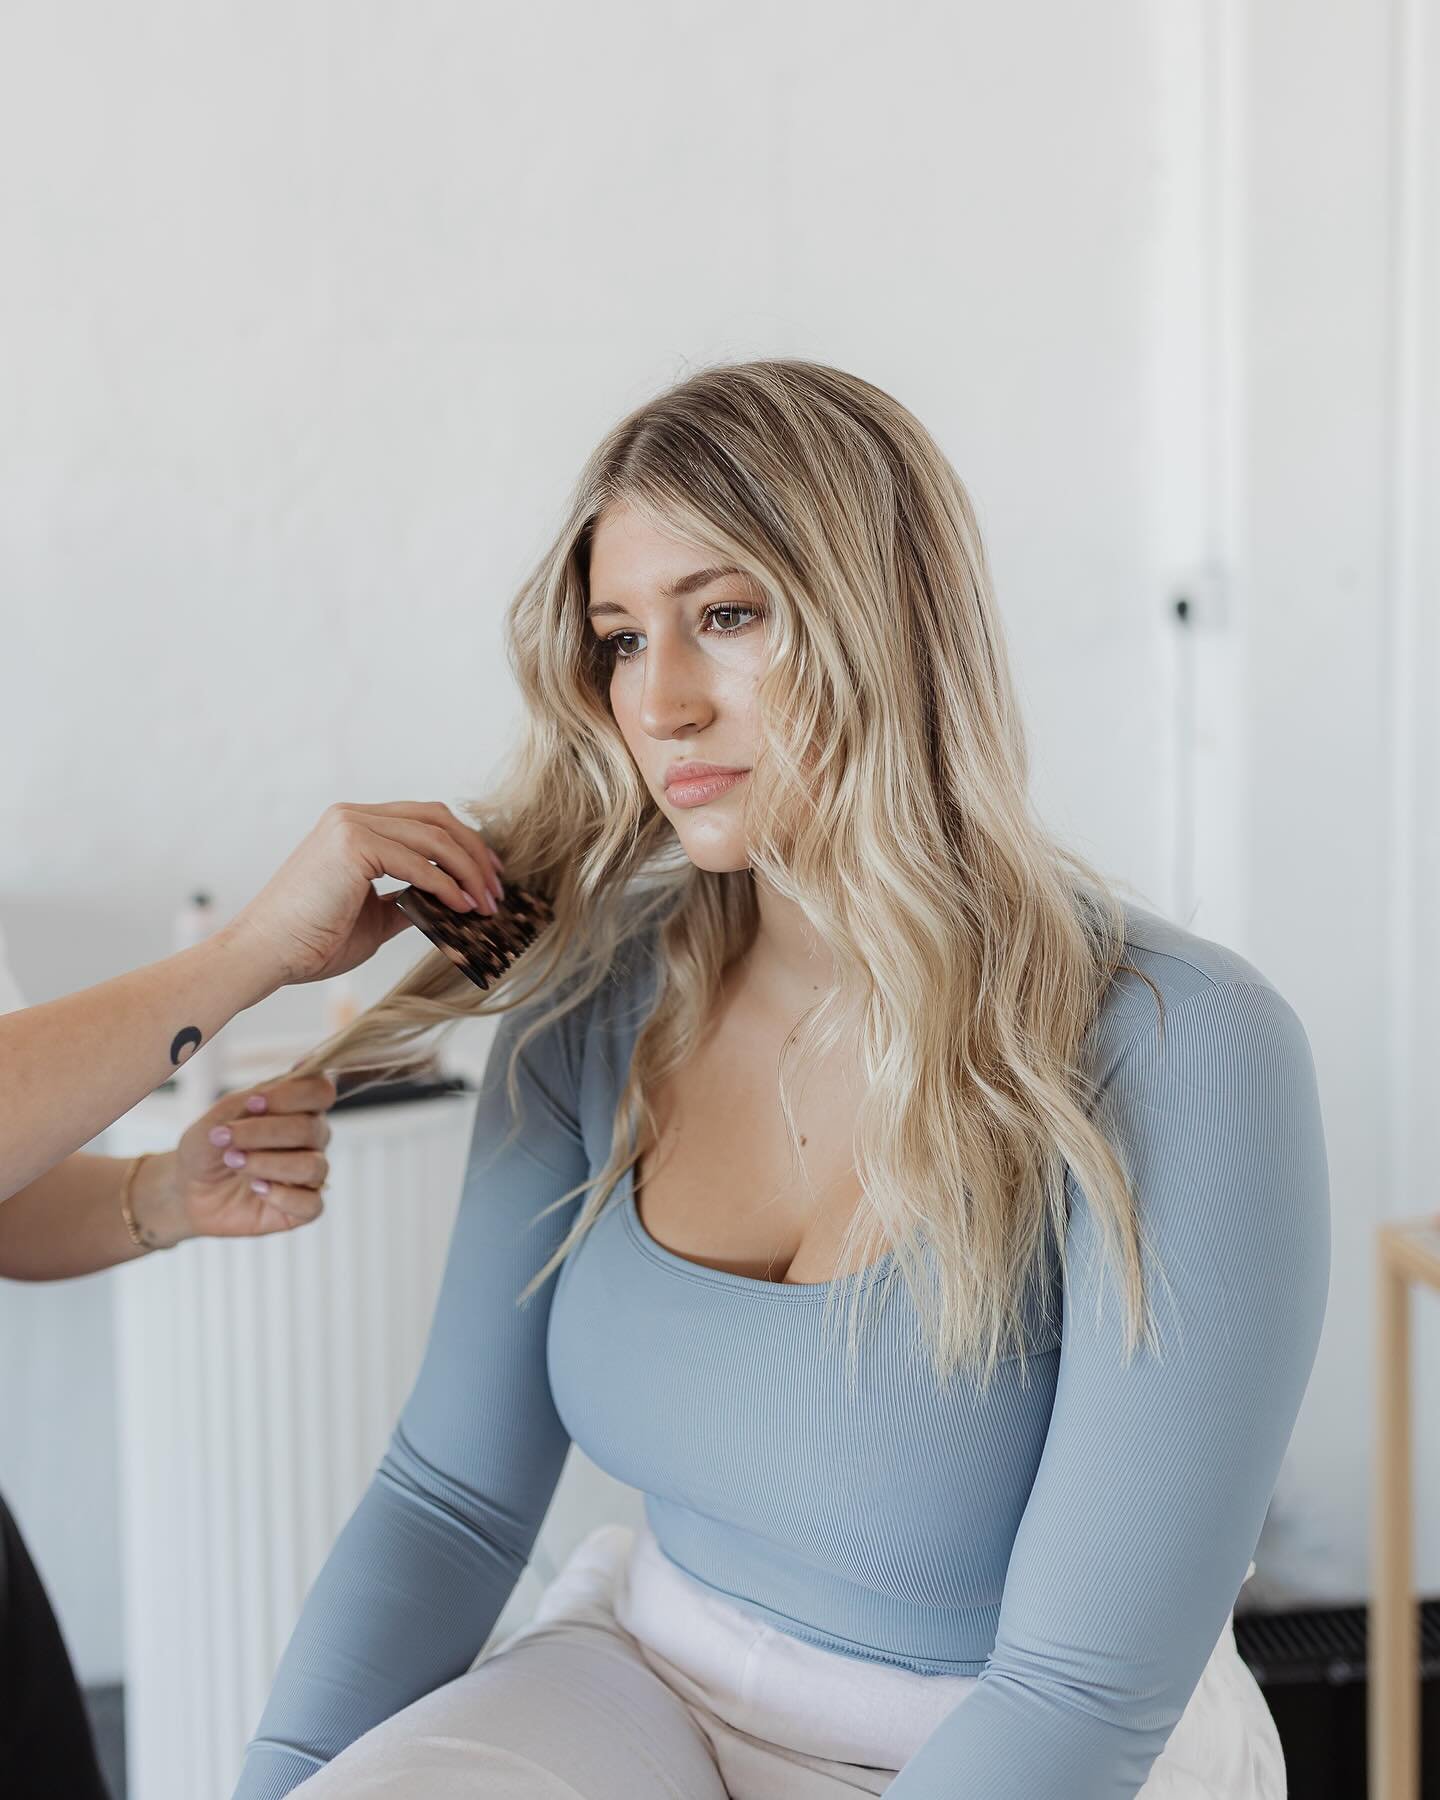 The prep work at this shoot deserves as much spotlight as the finished product! 💅🏼

Hair &amp; makeup by the incredibly talented @chloerosehairstylist @tegan_dollhousehair @sarahalexandramua 
Clothing: @clothlifestyleboutique 
Talent: @lifewithalex